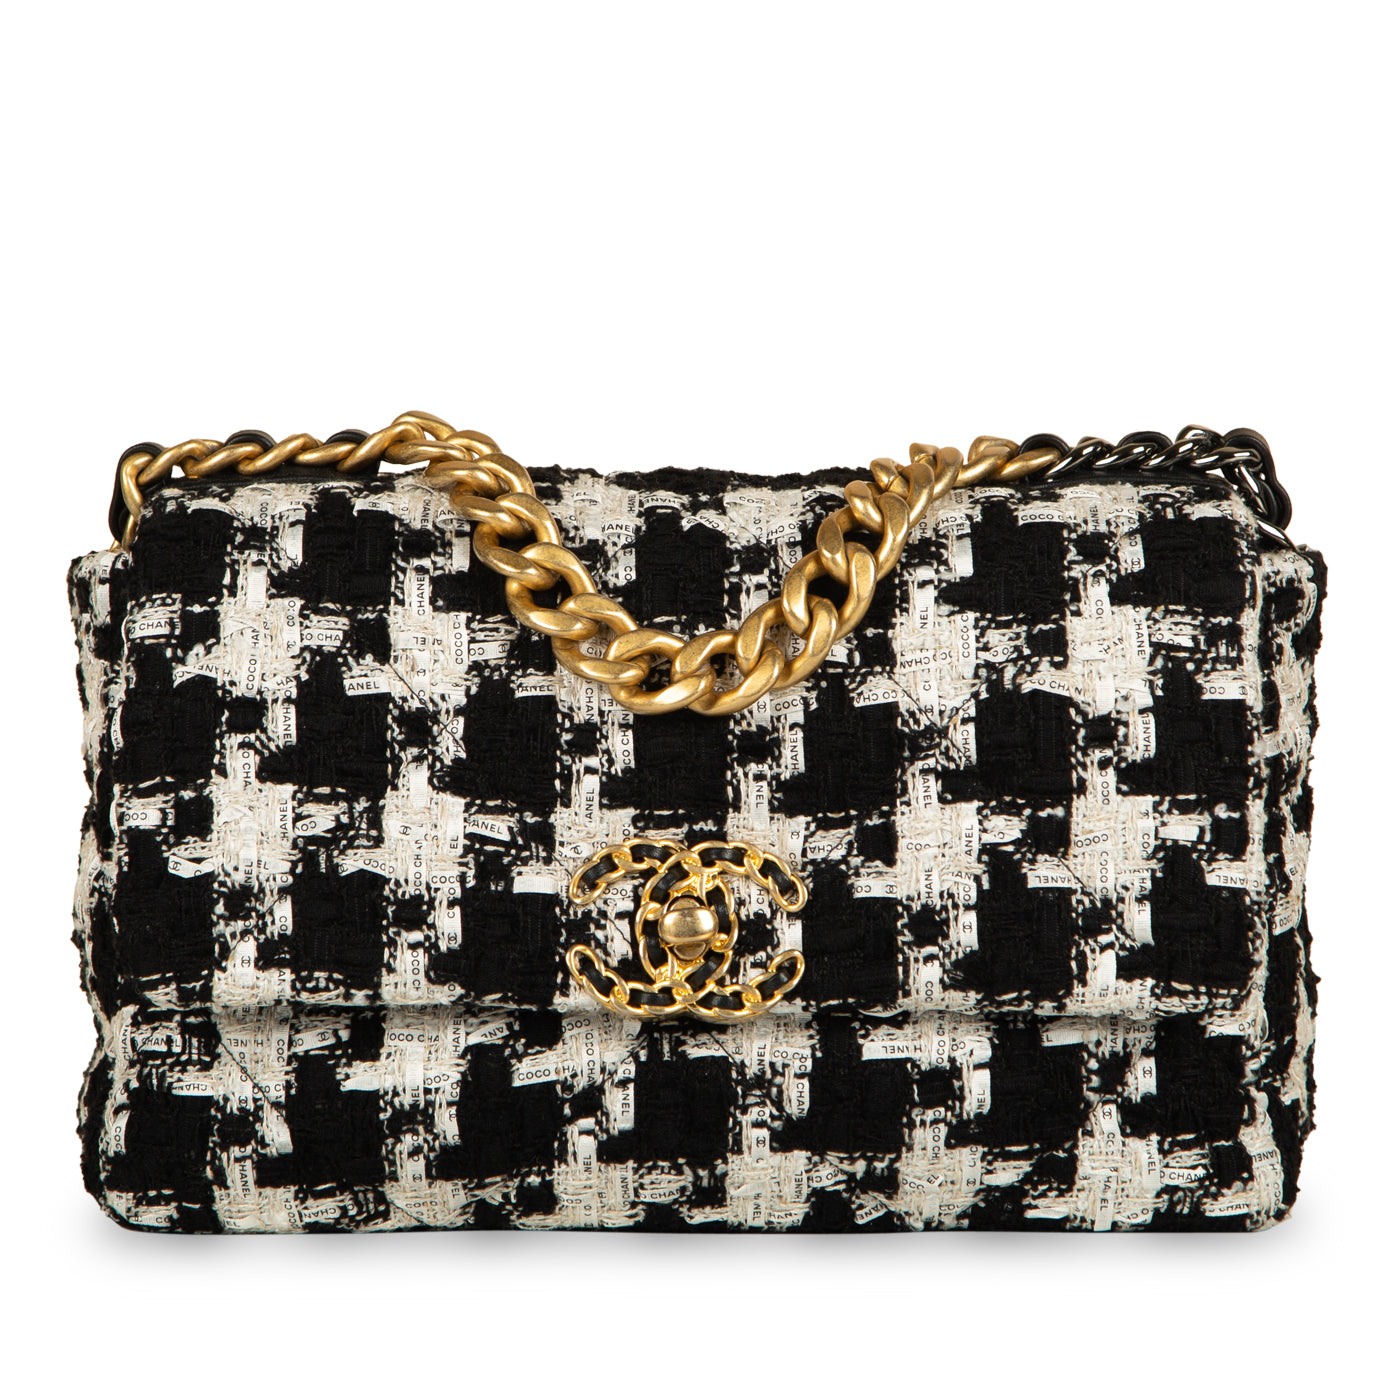 Chanel - Chanel 19 Flap Bag - Small - black and white